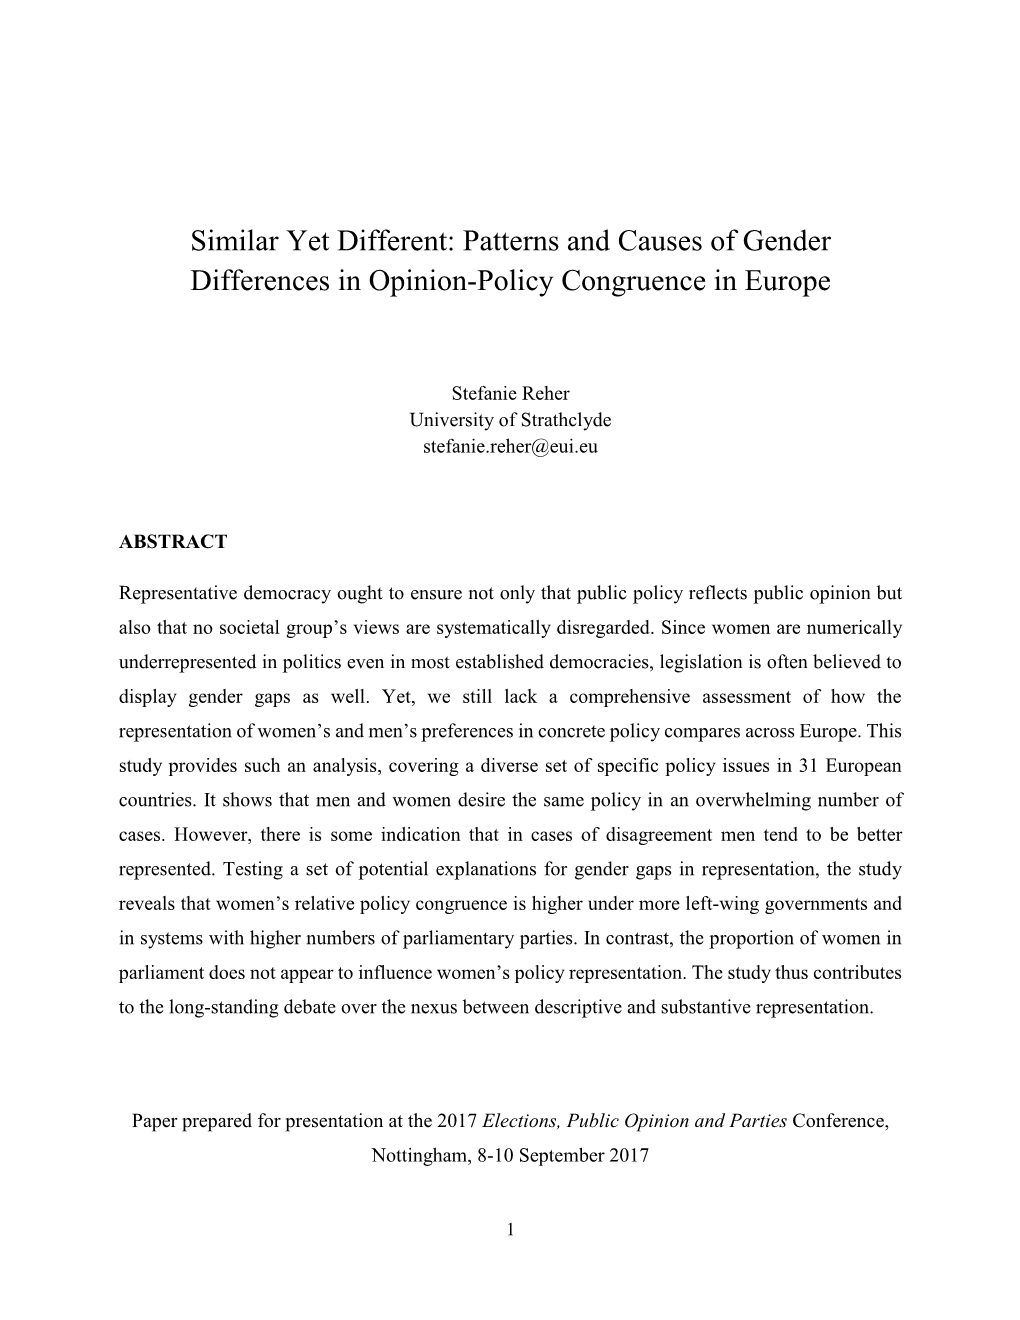 Patterns and Causes of Gender Differences in Opinion-Policy Congruence in Europe